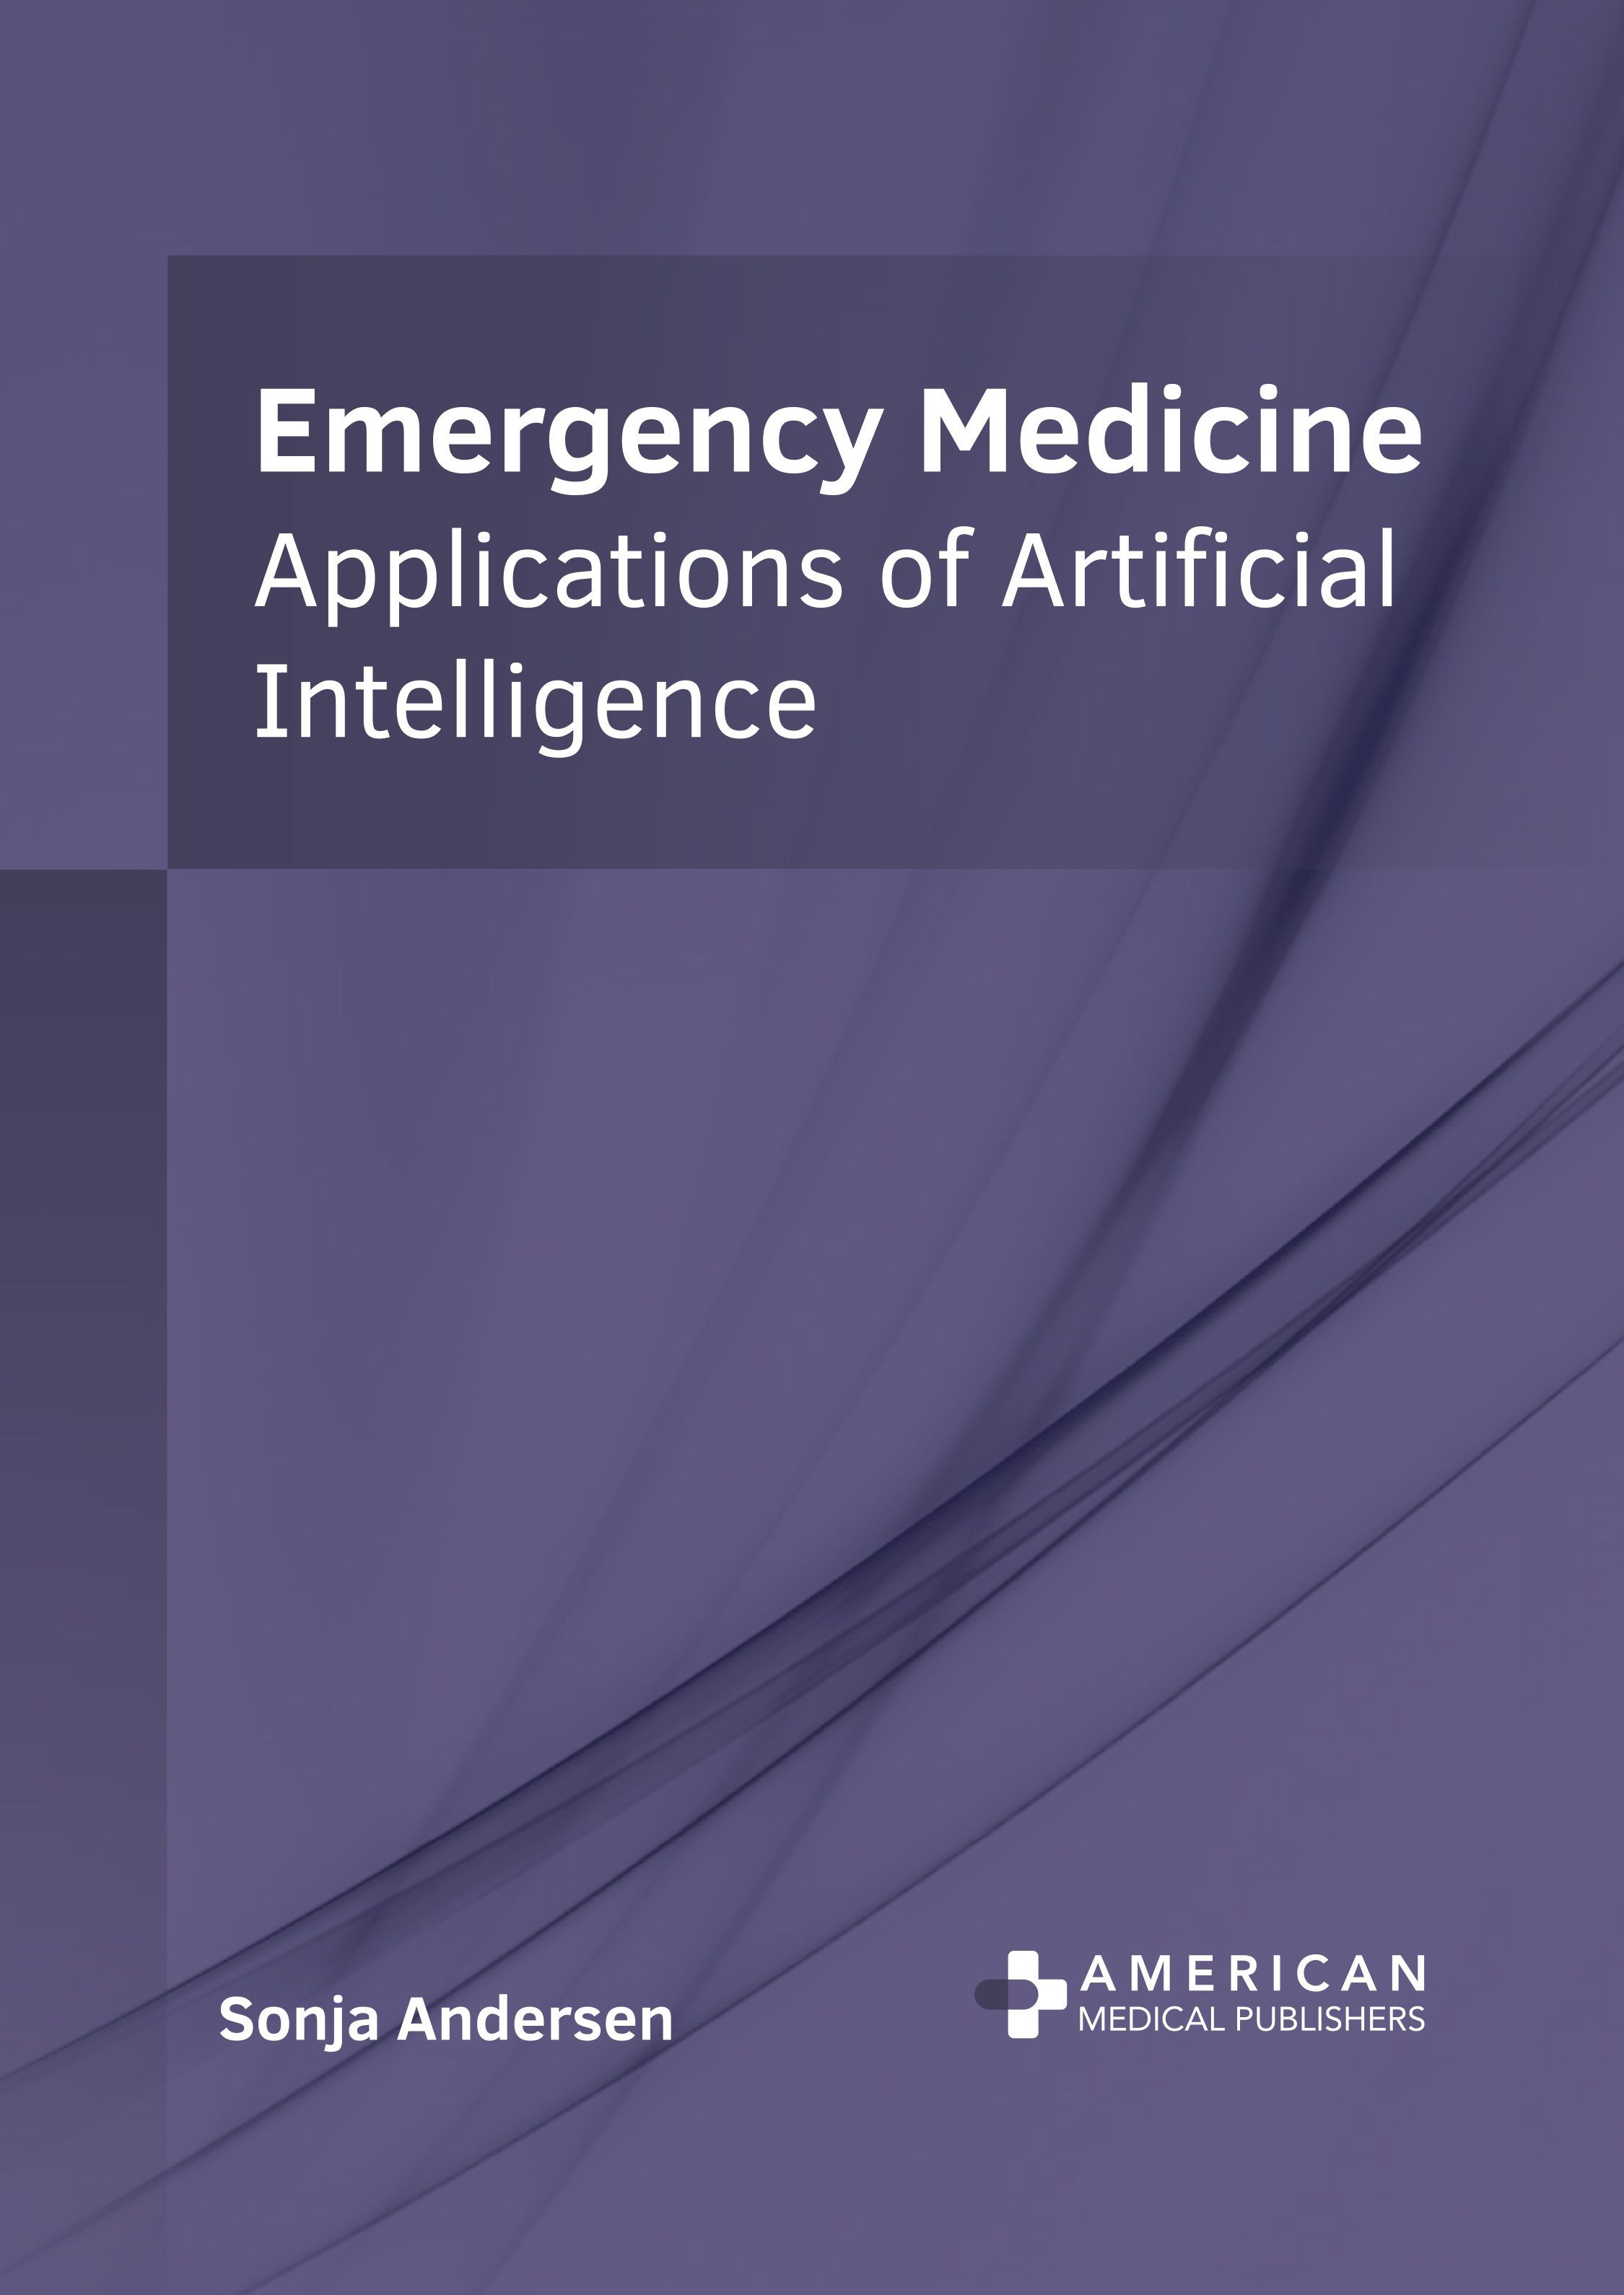 

exclusive-publishers/american-medical-publishers/emergency-medicine-applications-of-artificial-intelligence-9798887400877